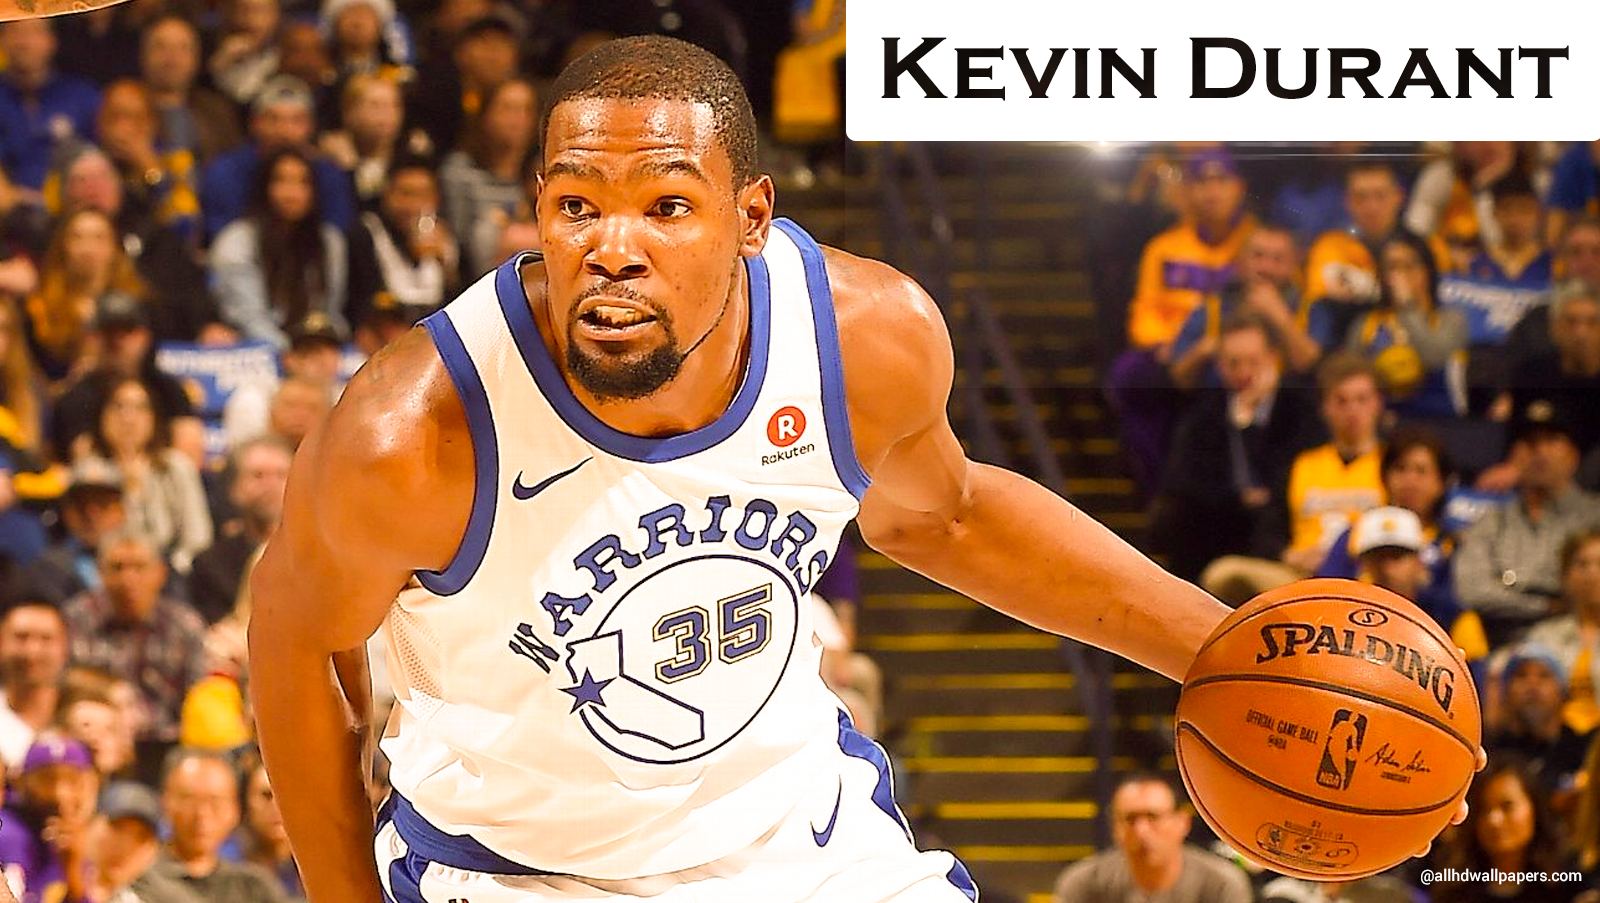 Kevin Durant Wallpaper - Kevin Durant In Action For Golden State Warriors - HD Wallpaper 